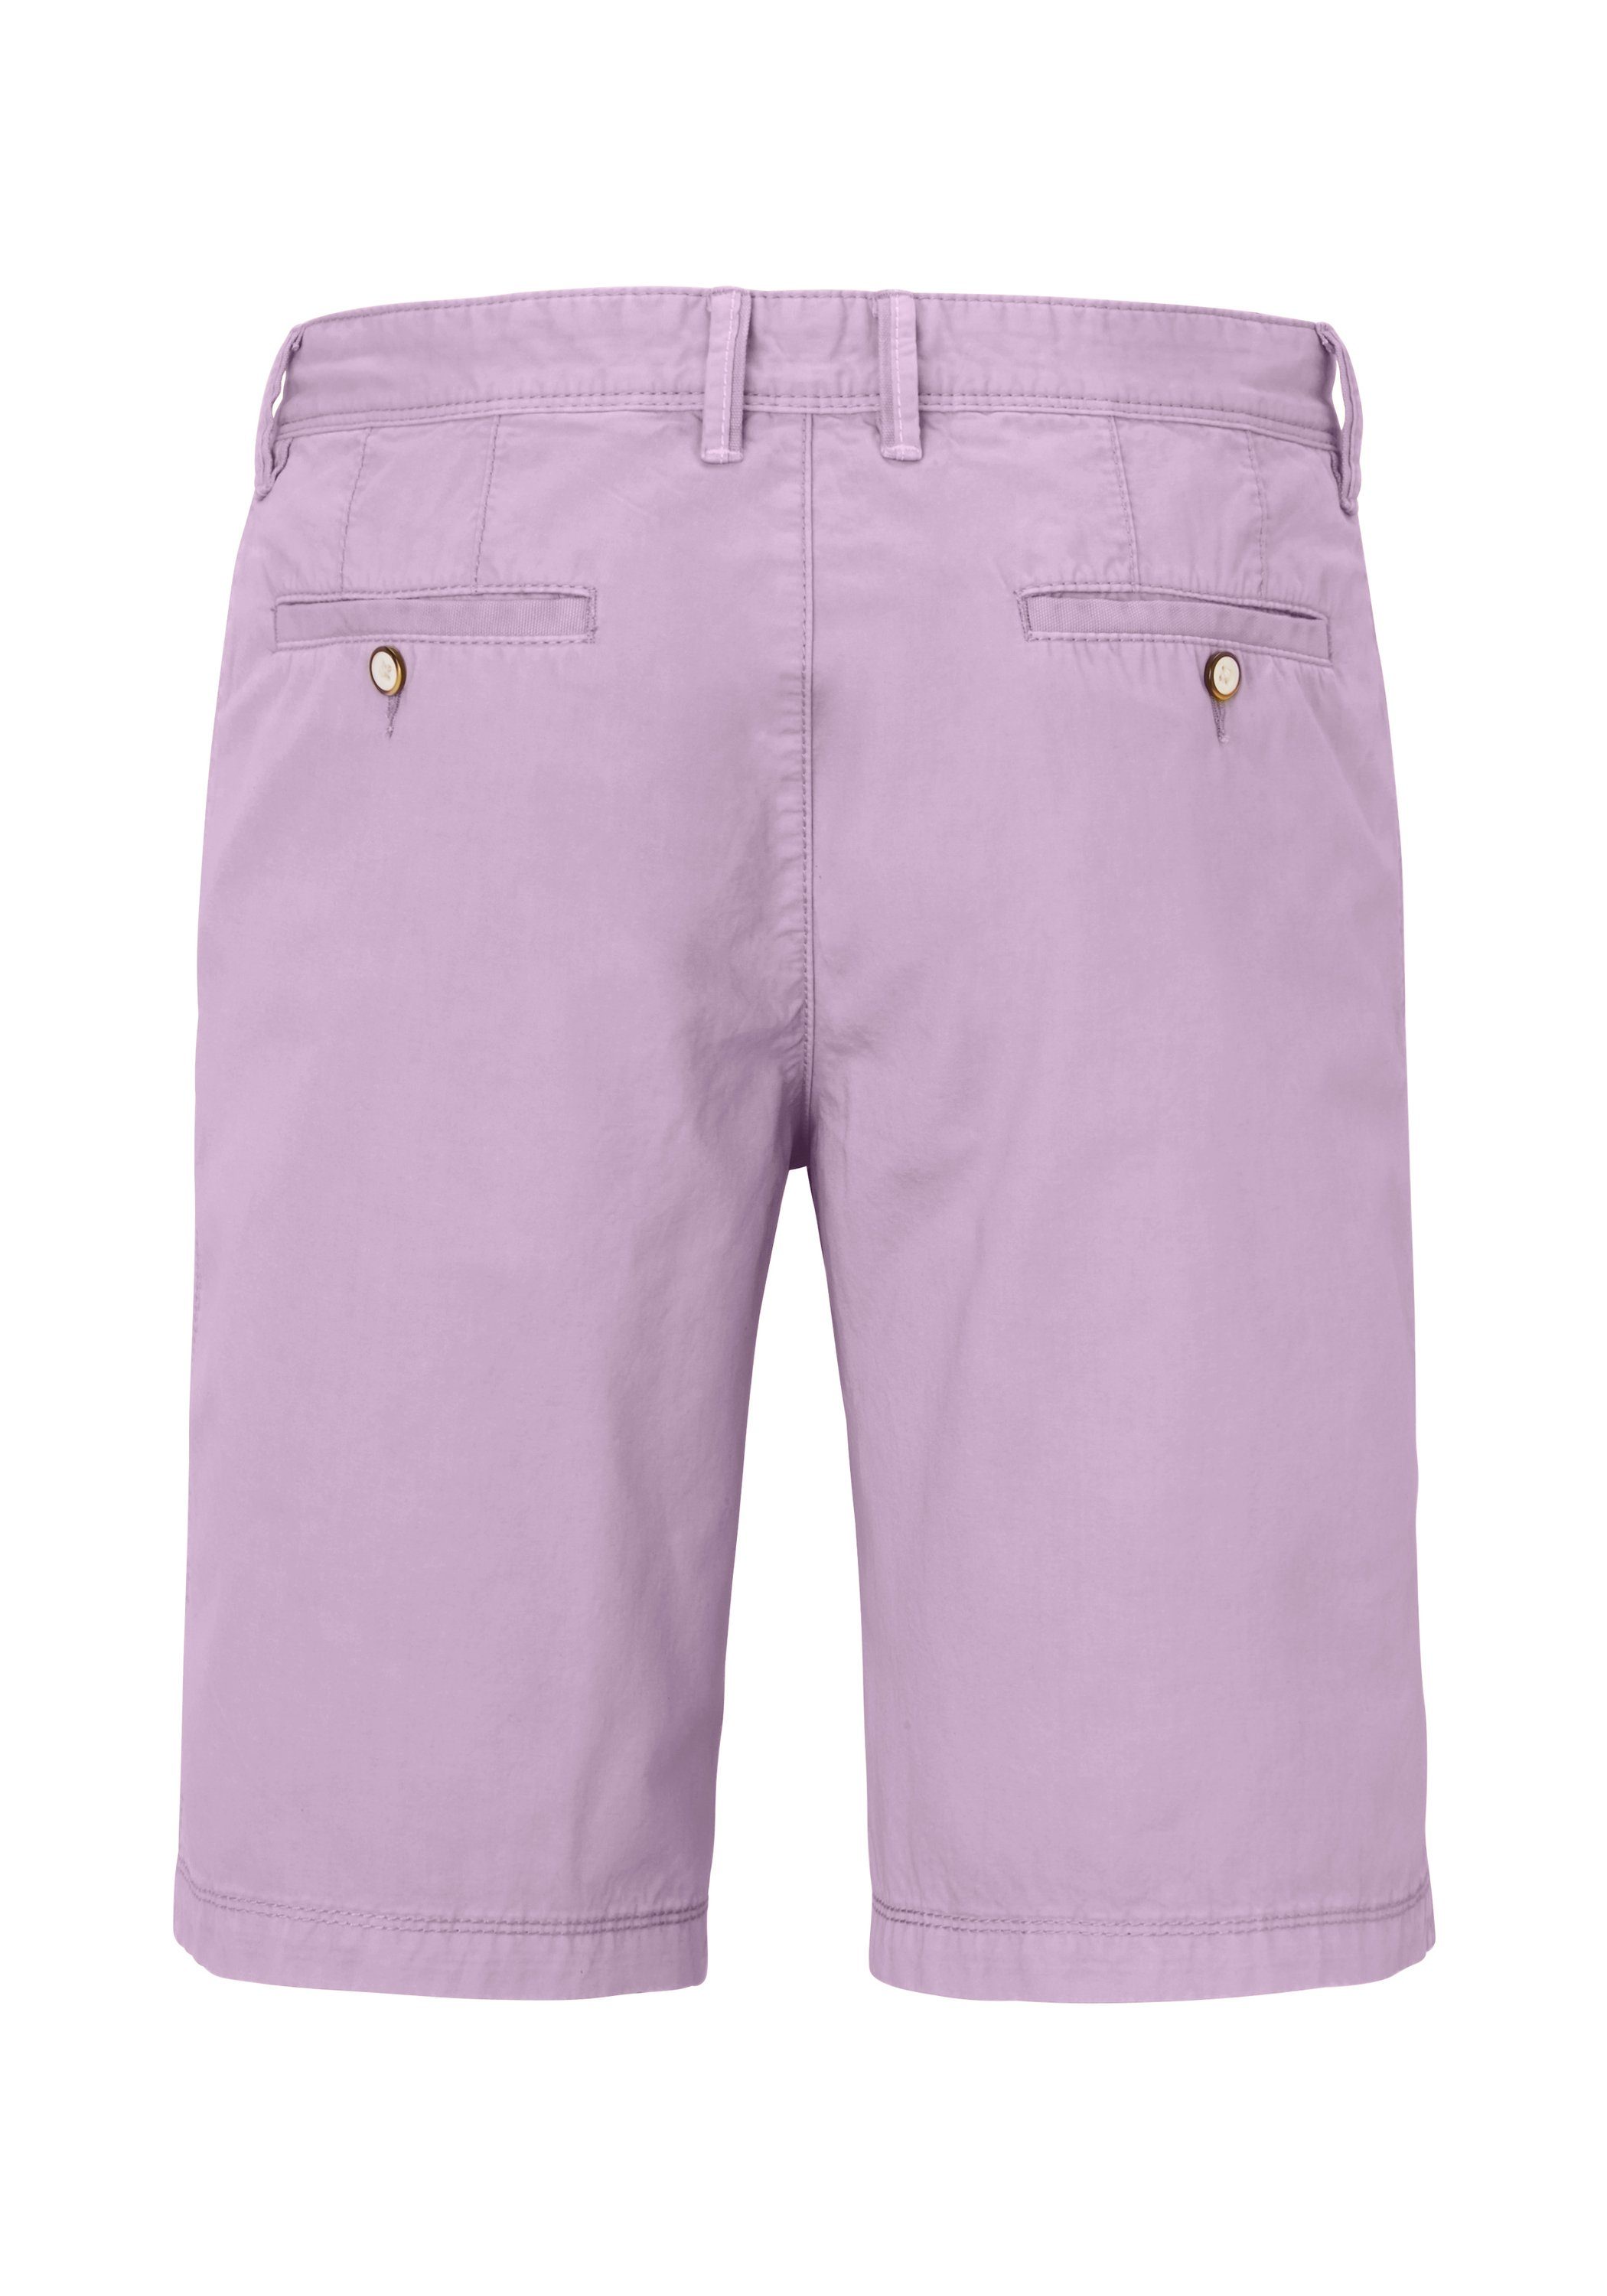 Redpoint Chinoshorts Edition Moderne pale - Chino Shades Bermudas lilac Surray 16